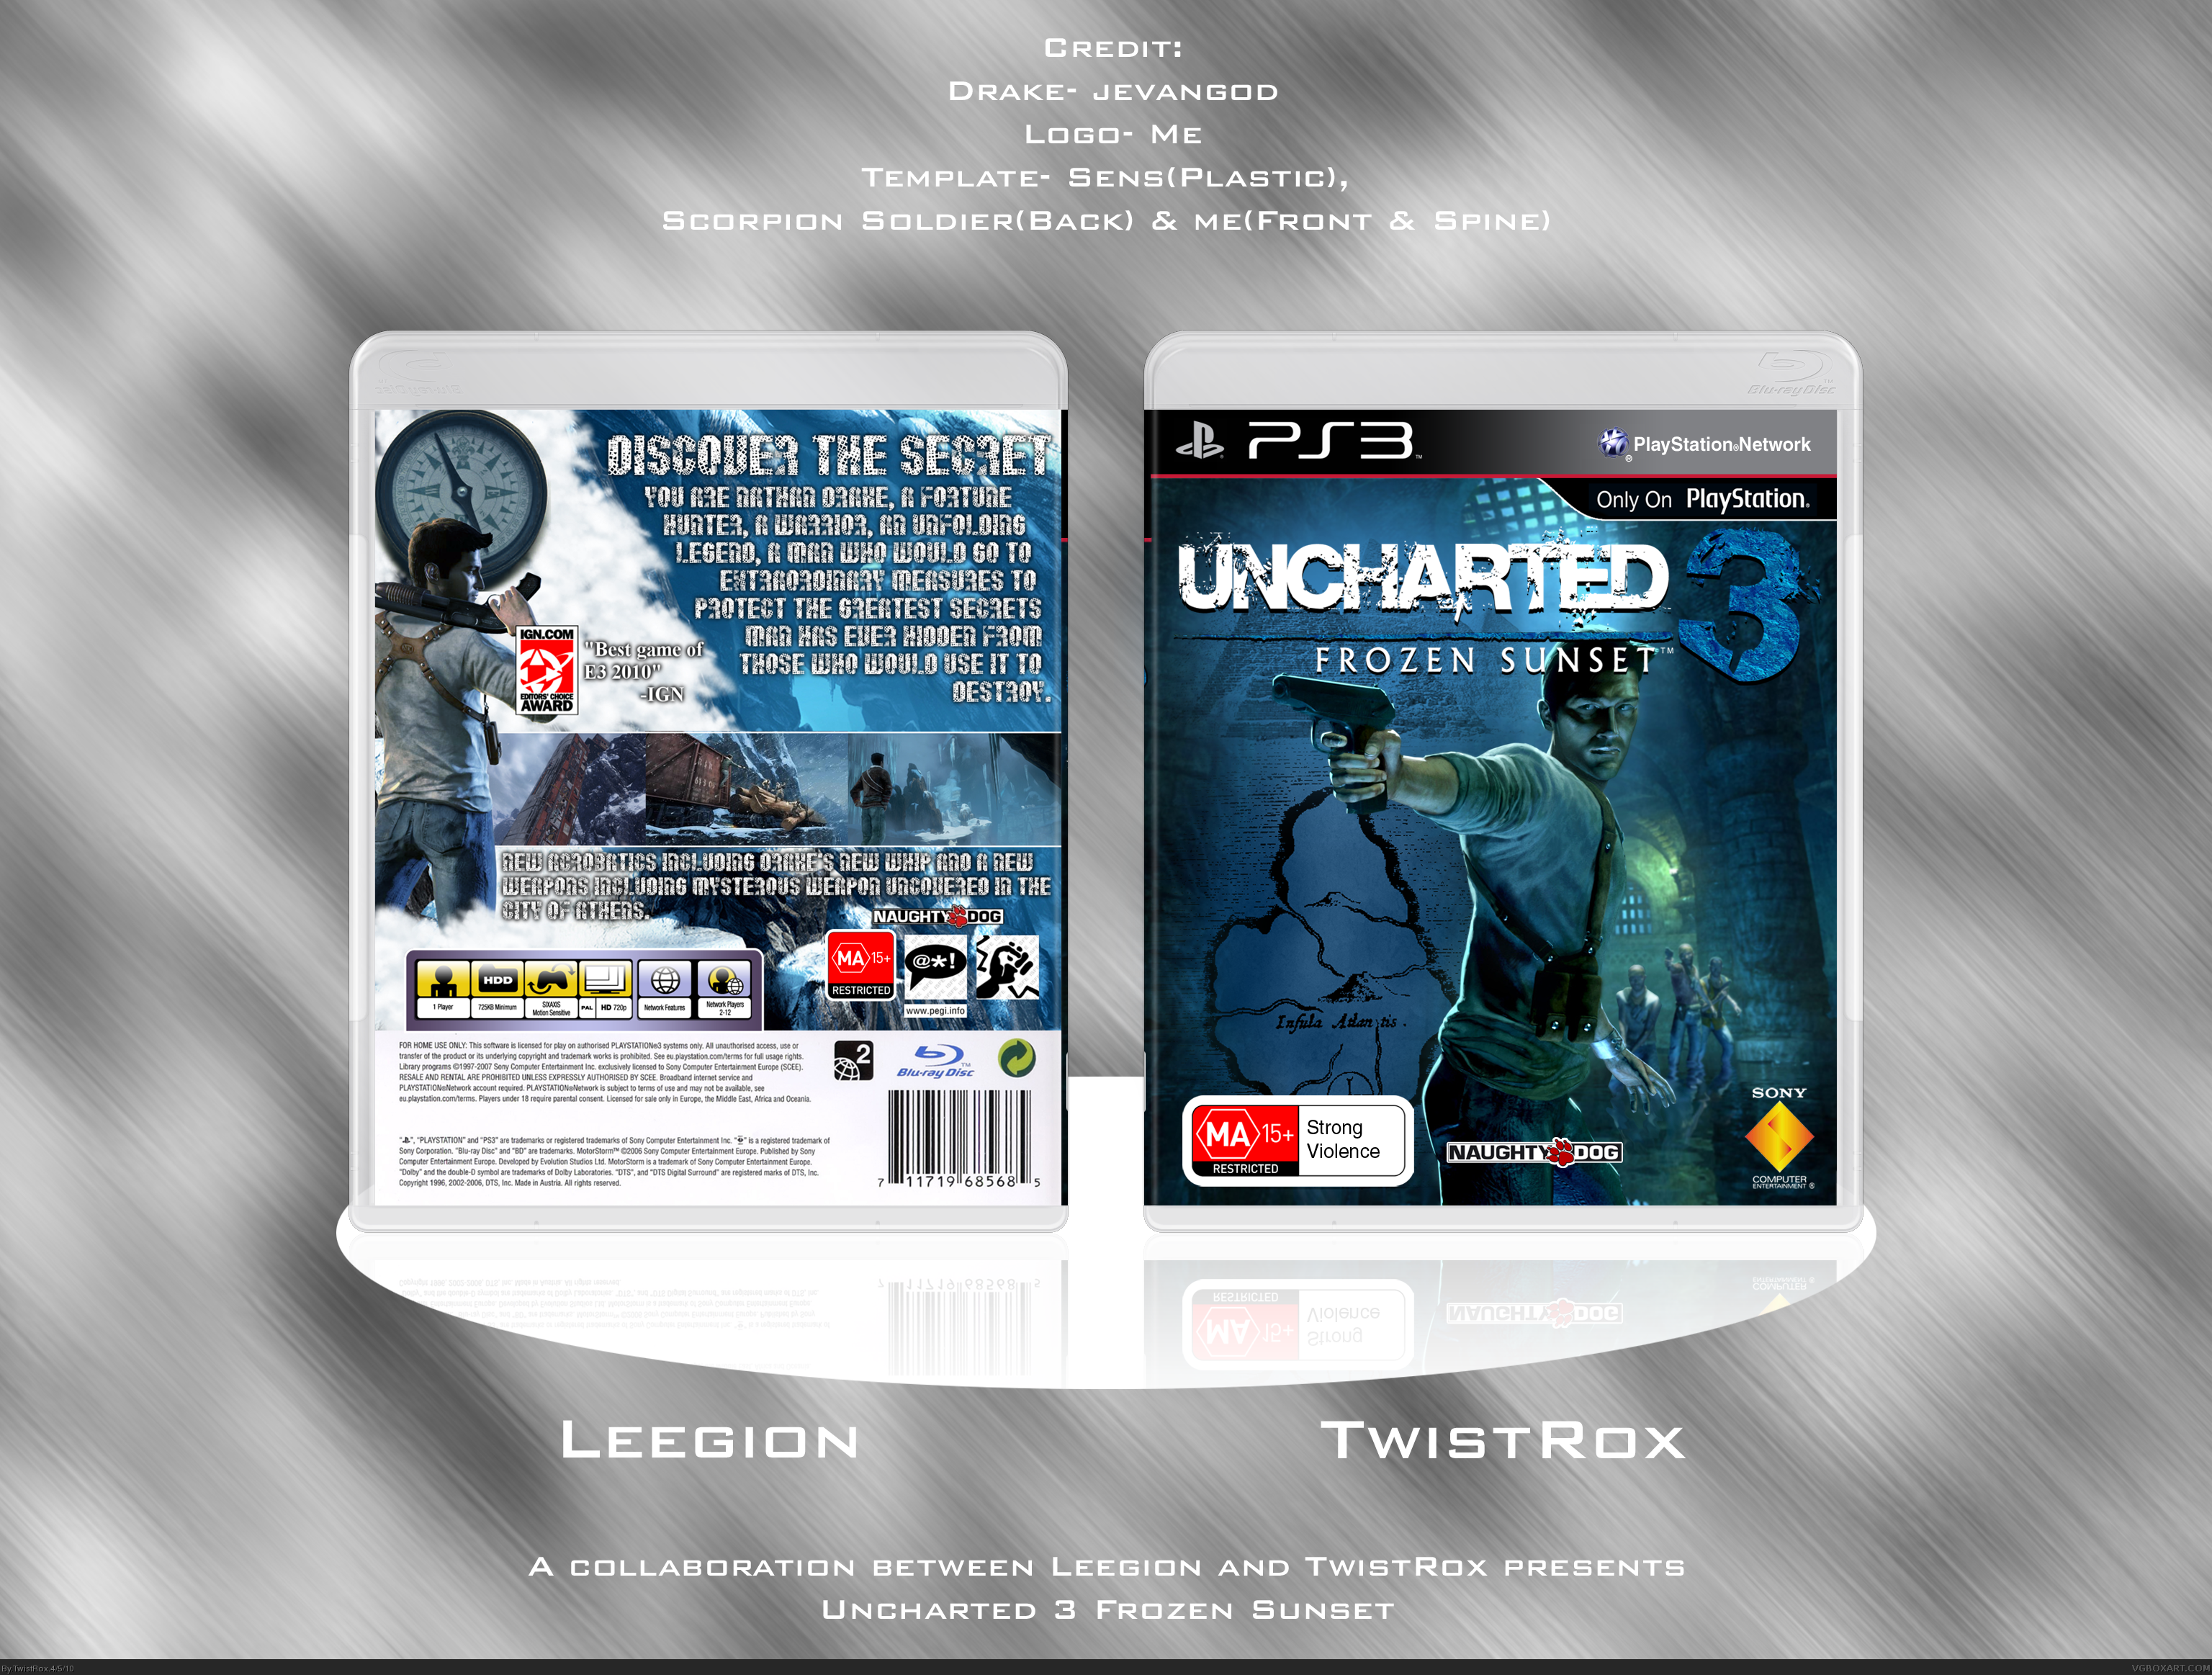 Uncharted 3 Frozen Sunset box cover